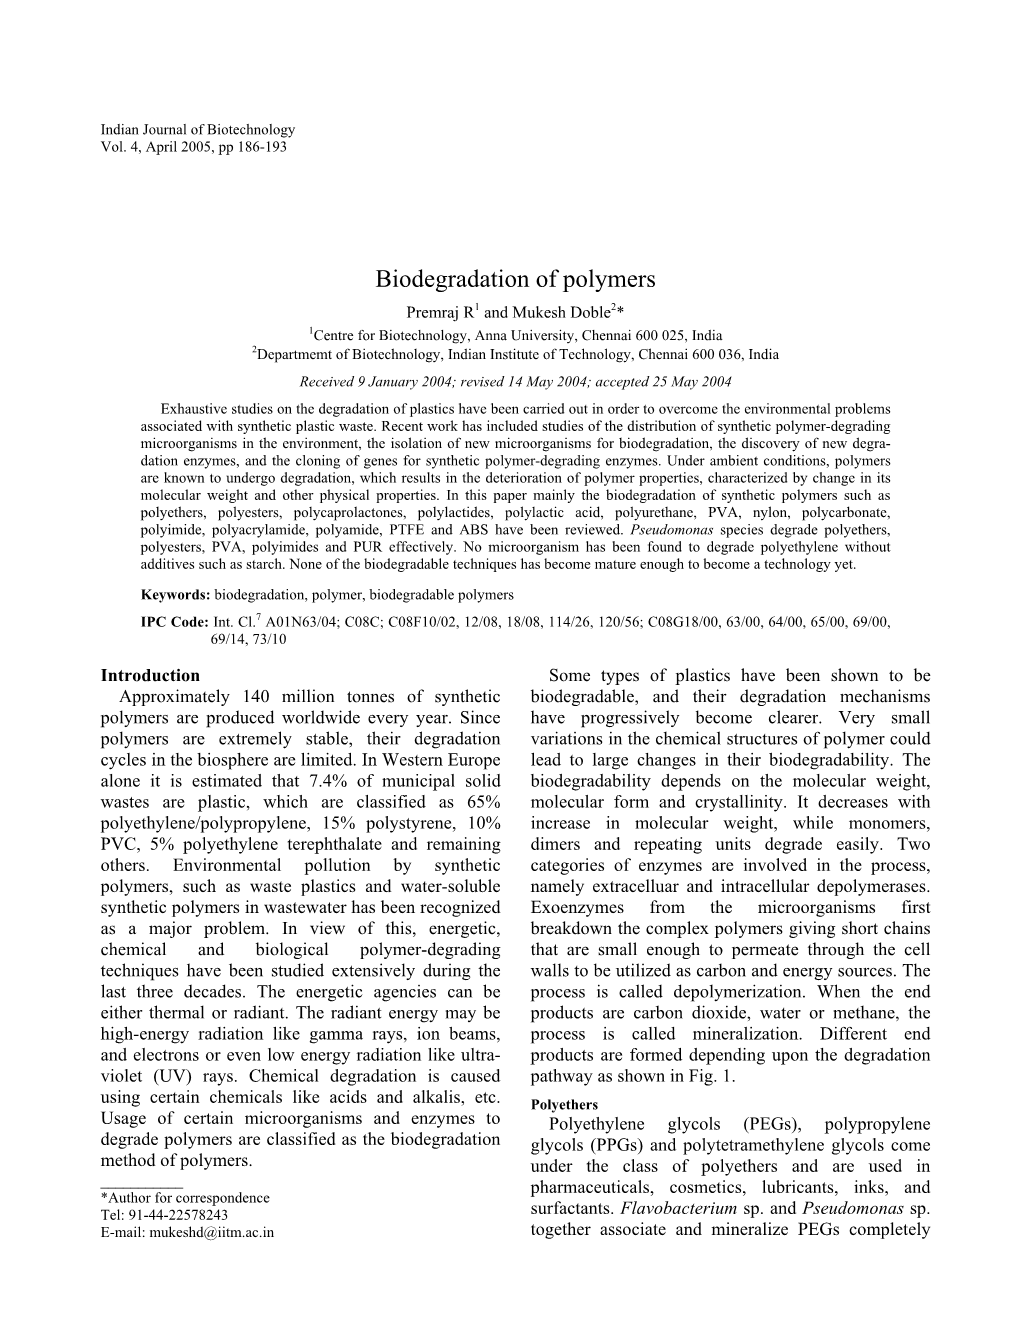 Biodegradation of Polymers